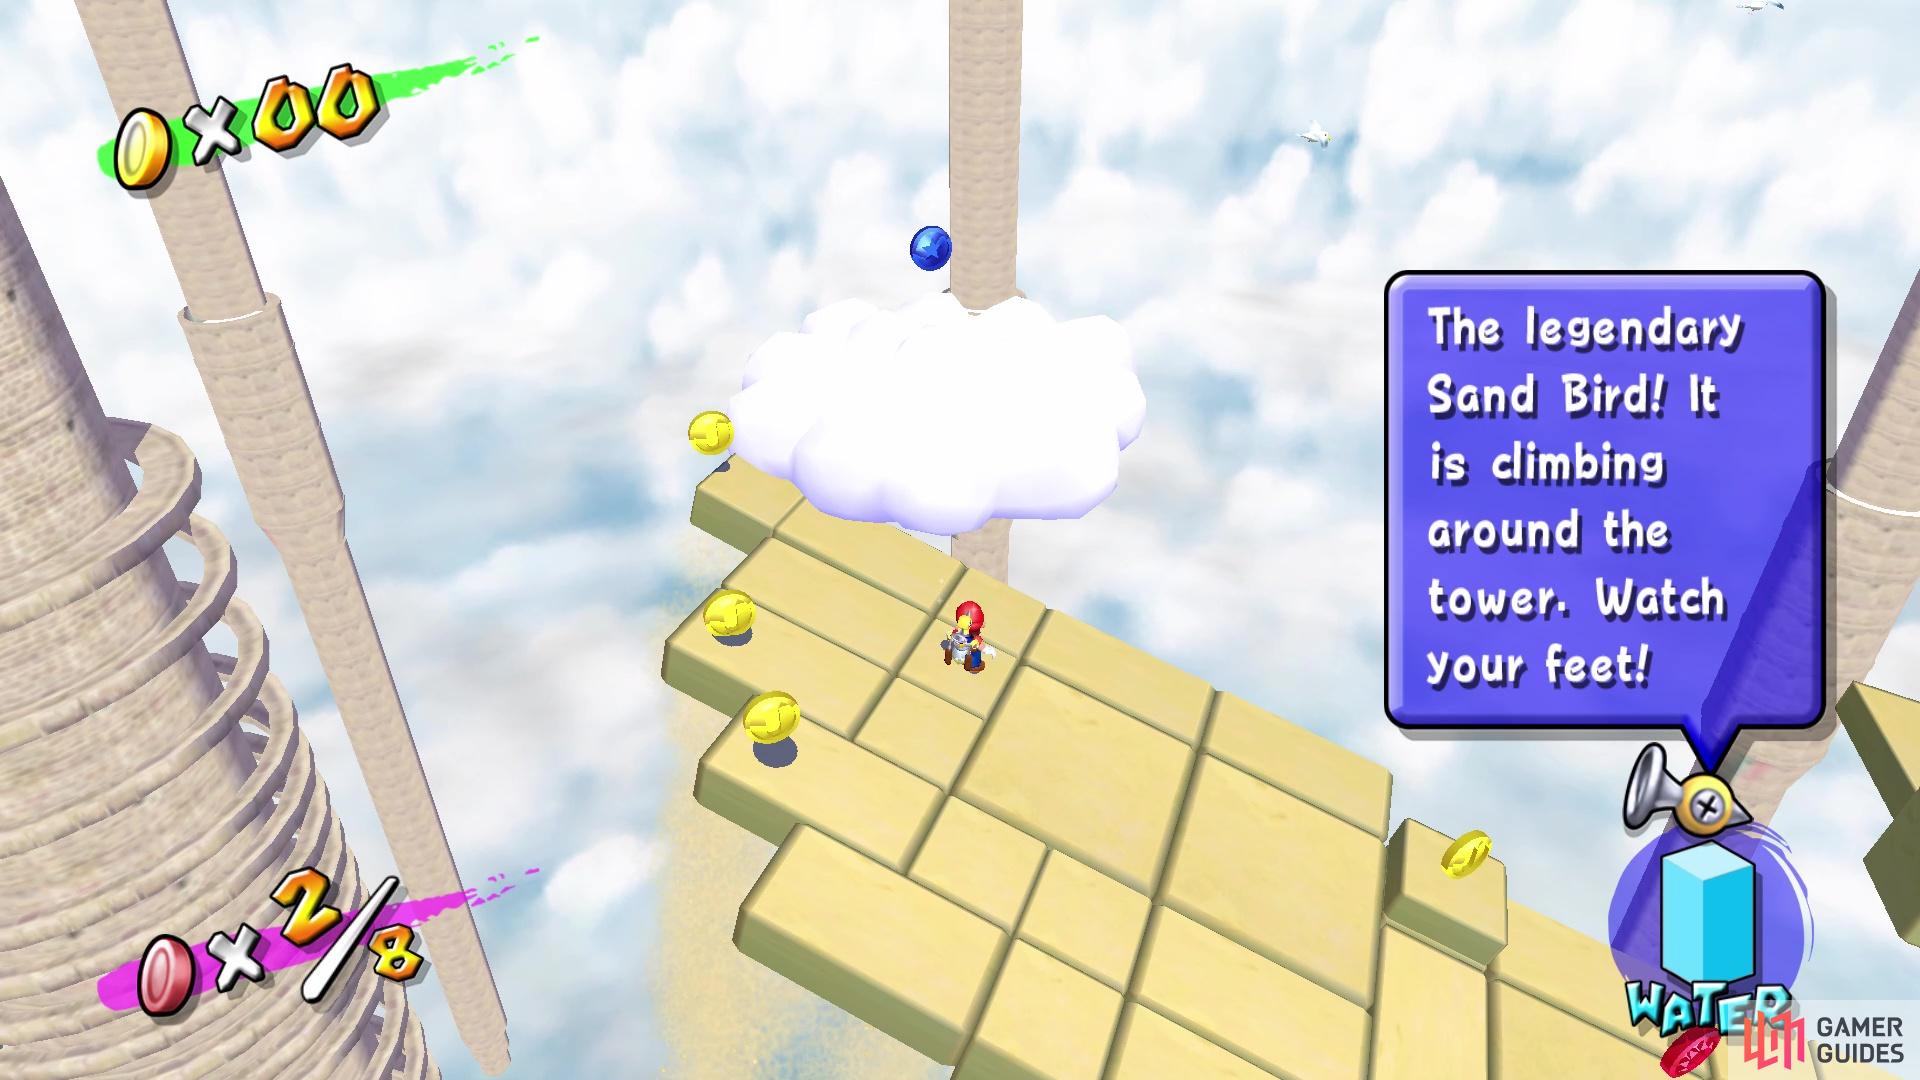 Four Blue Coins can be found on clouds in the area with the Sand Bird